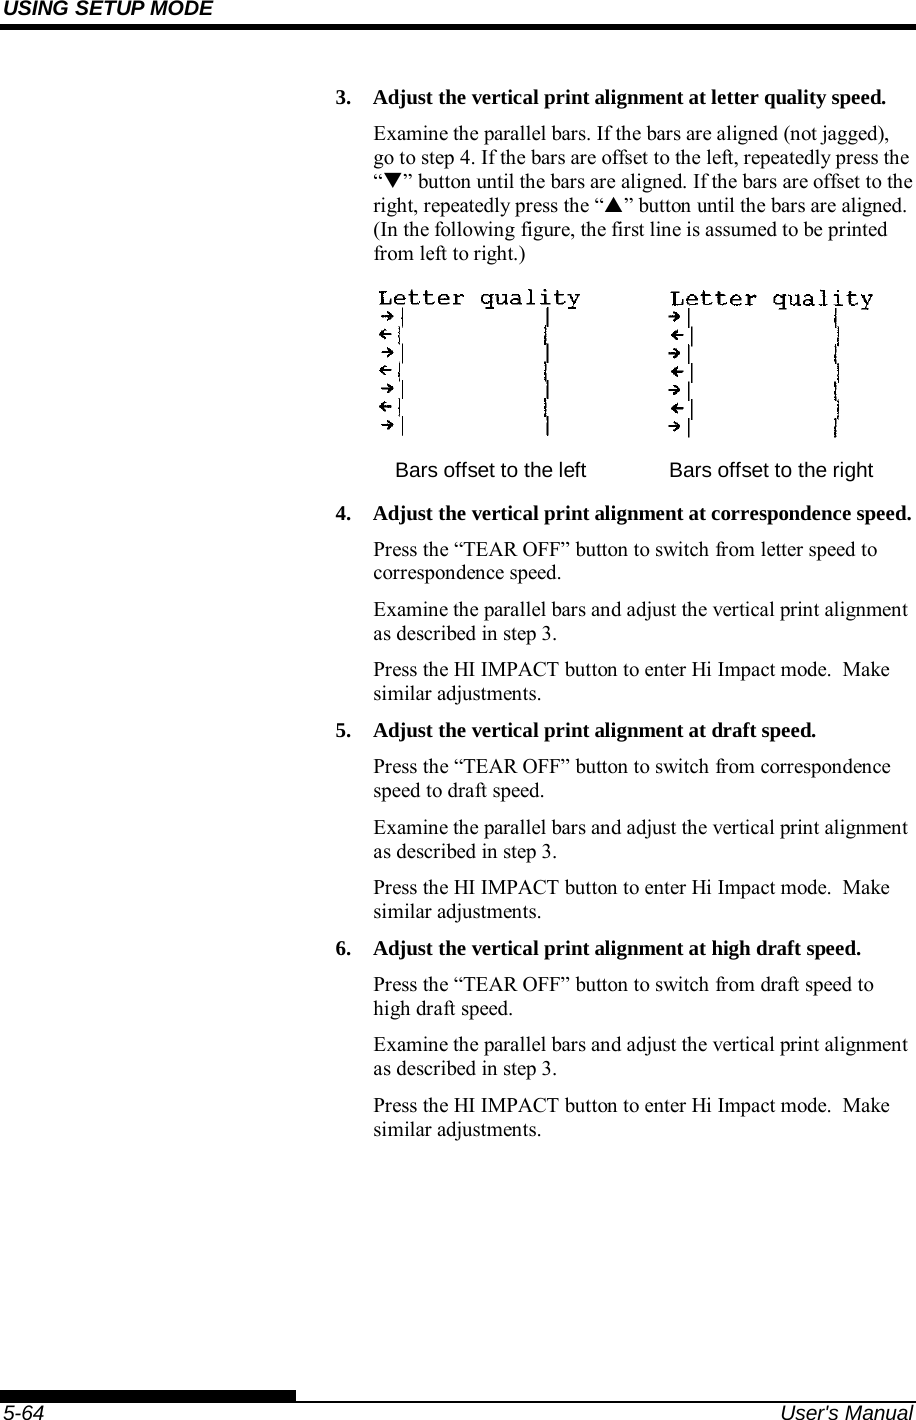 USING SETUP MODE    5-64  User&apos;s Manual 3.  Adjust the vertical print alignment at letter quality speed. Examine the parallel bars. If the bars are aligned (not jagged), go to step 4. If the bars are offset to the left, repeatedly press the “” button until the bars are aligned. If the bars are offset to the right, repeatedly press the “” button until the bars are aligned. (In the following figure, the first line is assumed to be printed from left to right.)    Bars offset to the left  Bars offset to the right 4.  Adjust the vertical print alignment at correspondence speed. Press the “TEAR OFF” button to switch from letter speed to correspondence speed. Examine the parallel bars and adjust the vertical print alignment as described in step 3. Press the HI IMPACT button to enter Hi Impact mode.  Make similar adjustments. 5.  Adjust the vertical print alignment at draft speed. Press the “TEAR OFF” button to switch from correspondence speed to draft speed. Examine the parallel bars and adjust the vertical print alignment as described in step 3. Press the HI IMPACT button to enter Hi Impact mode.  Make similar adjustments. 6.  Adjust the vertical print alignment at high draft speed. Press the “TEAR OFF” button to switch from draft speed to high draft speed. Examine the parallel bars and adjust the vertical print alignment as described in step 3. Press the HI IMPACT button to enter Hi Impact mode.  Make similar adjustments. 